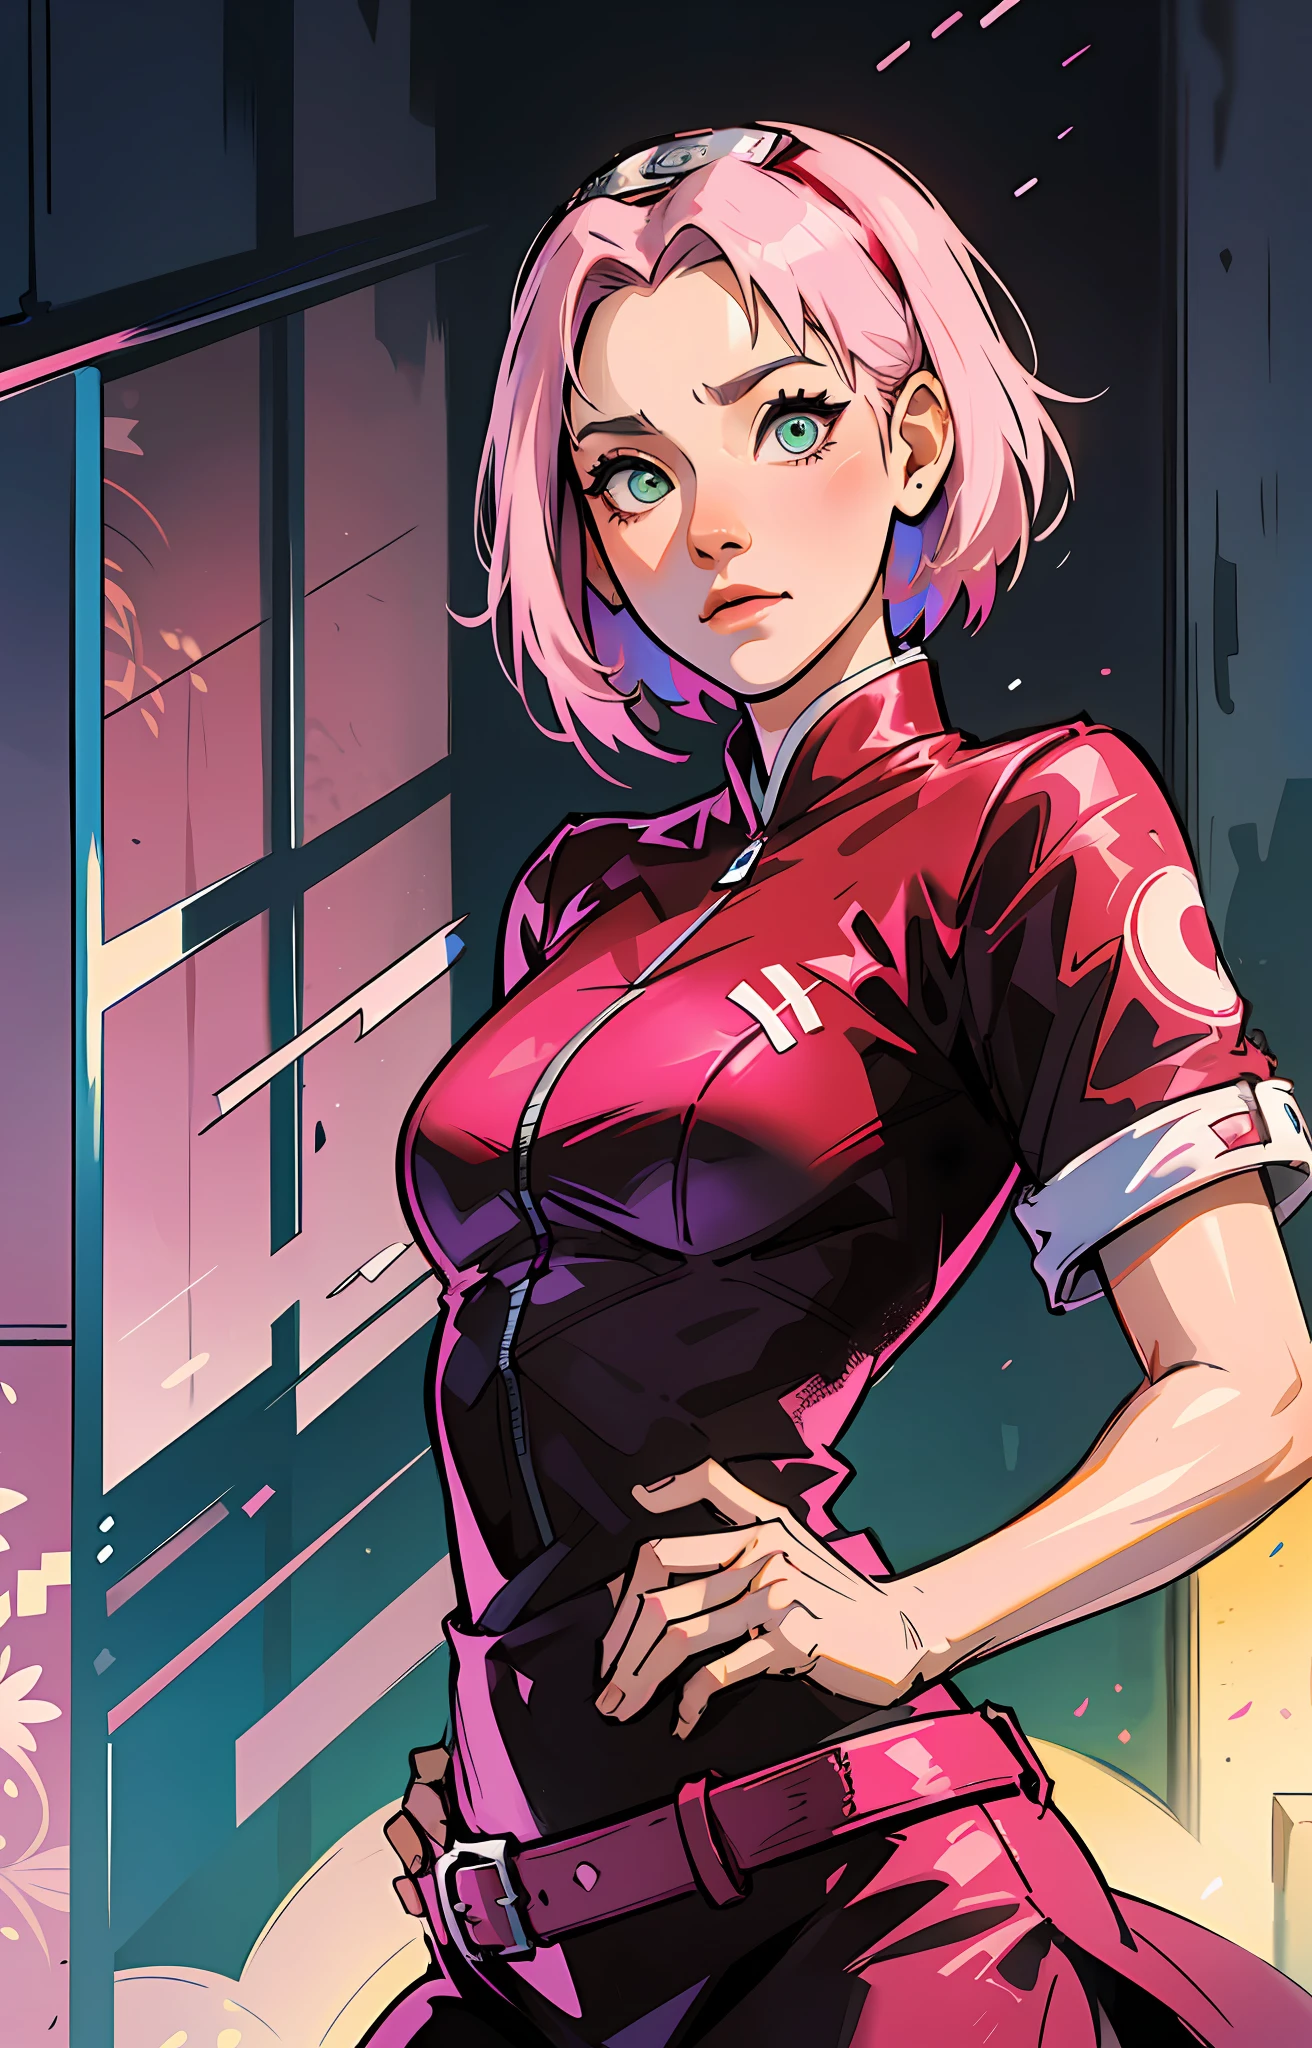 sakura haruno, ((soli)), alone, ((Head for the exhibition)), chic,wearing a red blouse and a light pink skirt,  Sakura Haruno in Naruto Shippuden,  she's charming, appealing, pink  hair, dainty, Youngh, shorth hair, detailded, hight definition, ((fully body)), she's in her house looking at a picture, gazing at viewer,  she's a beautiful woman ,  beautiful and nice woman, Linda, Bela, high qualiy, defined eyes, hight definition, shiny, sharp strokes, Linda, red bow in hair,trending on ArtStation, por RHADS, andreas rocha, Horse, Makoto Shinkai, Laurie Greasley, lois van baarle, Ilya Kuvshinov e Greg Rutkowski